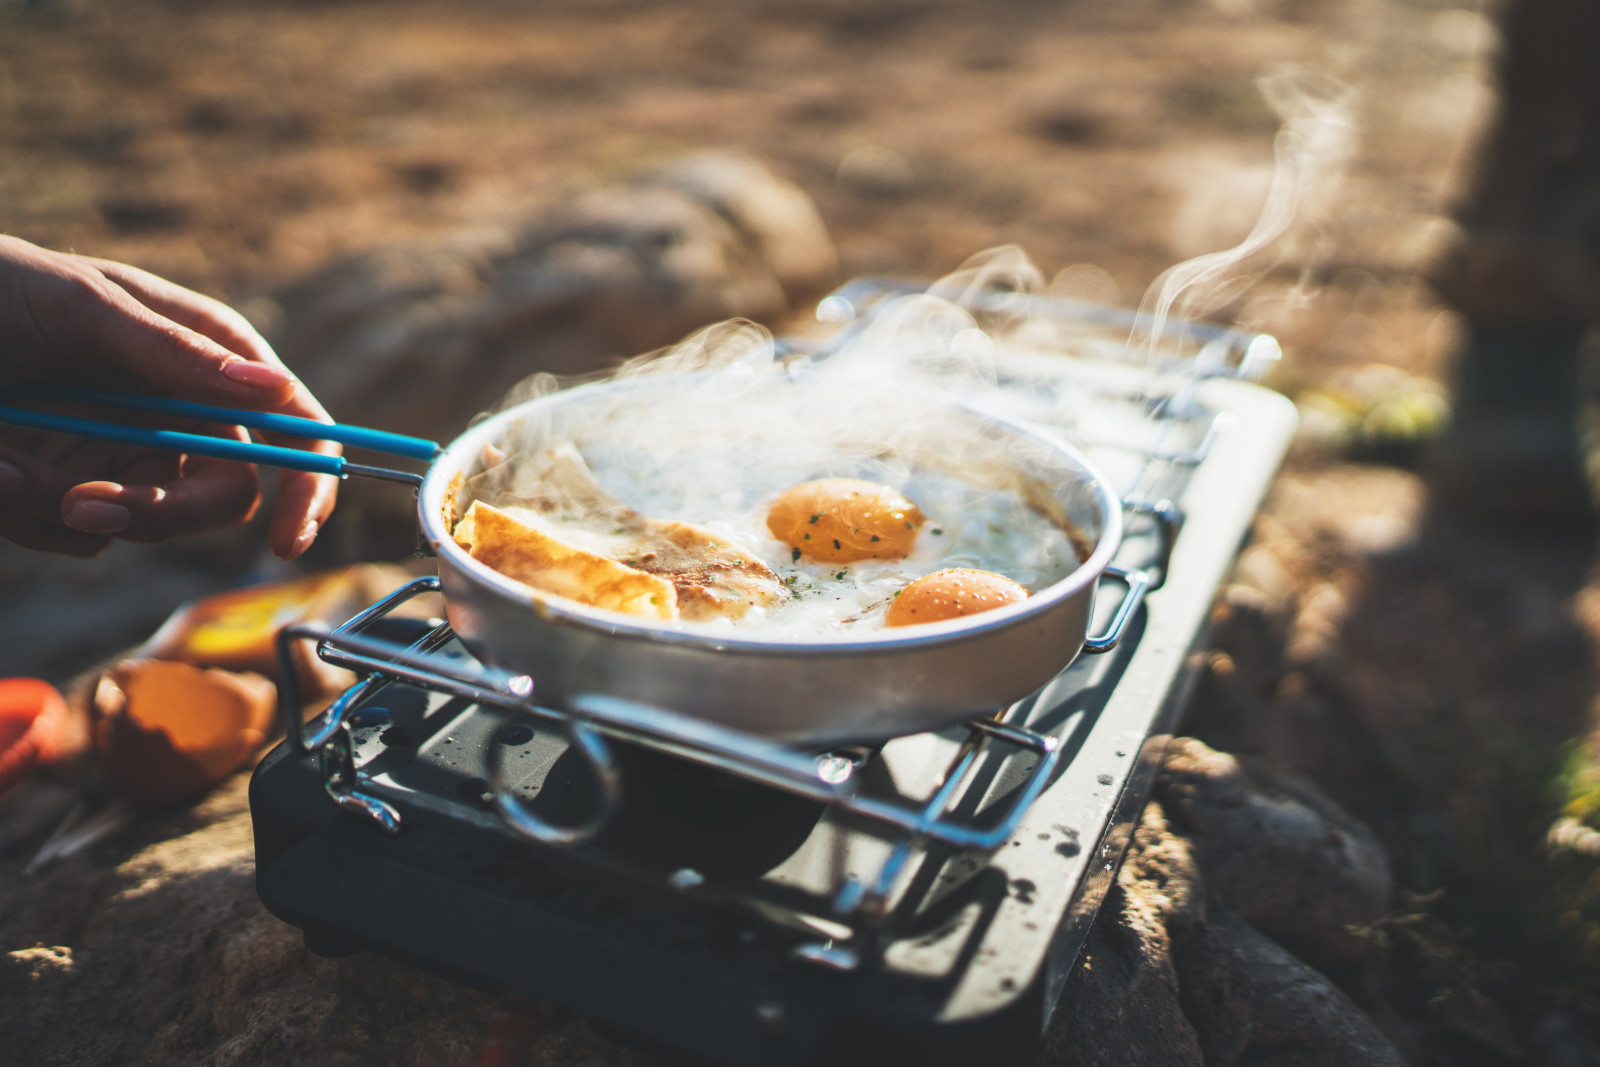 Man's hand cooking eggs in a frying pan over a camping stove.